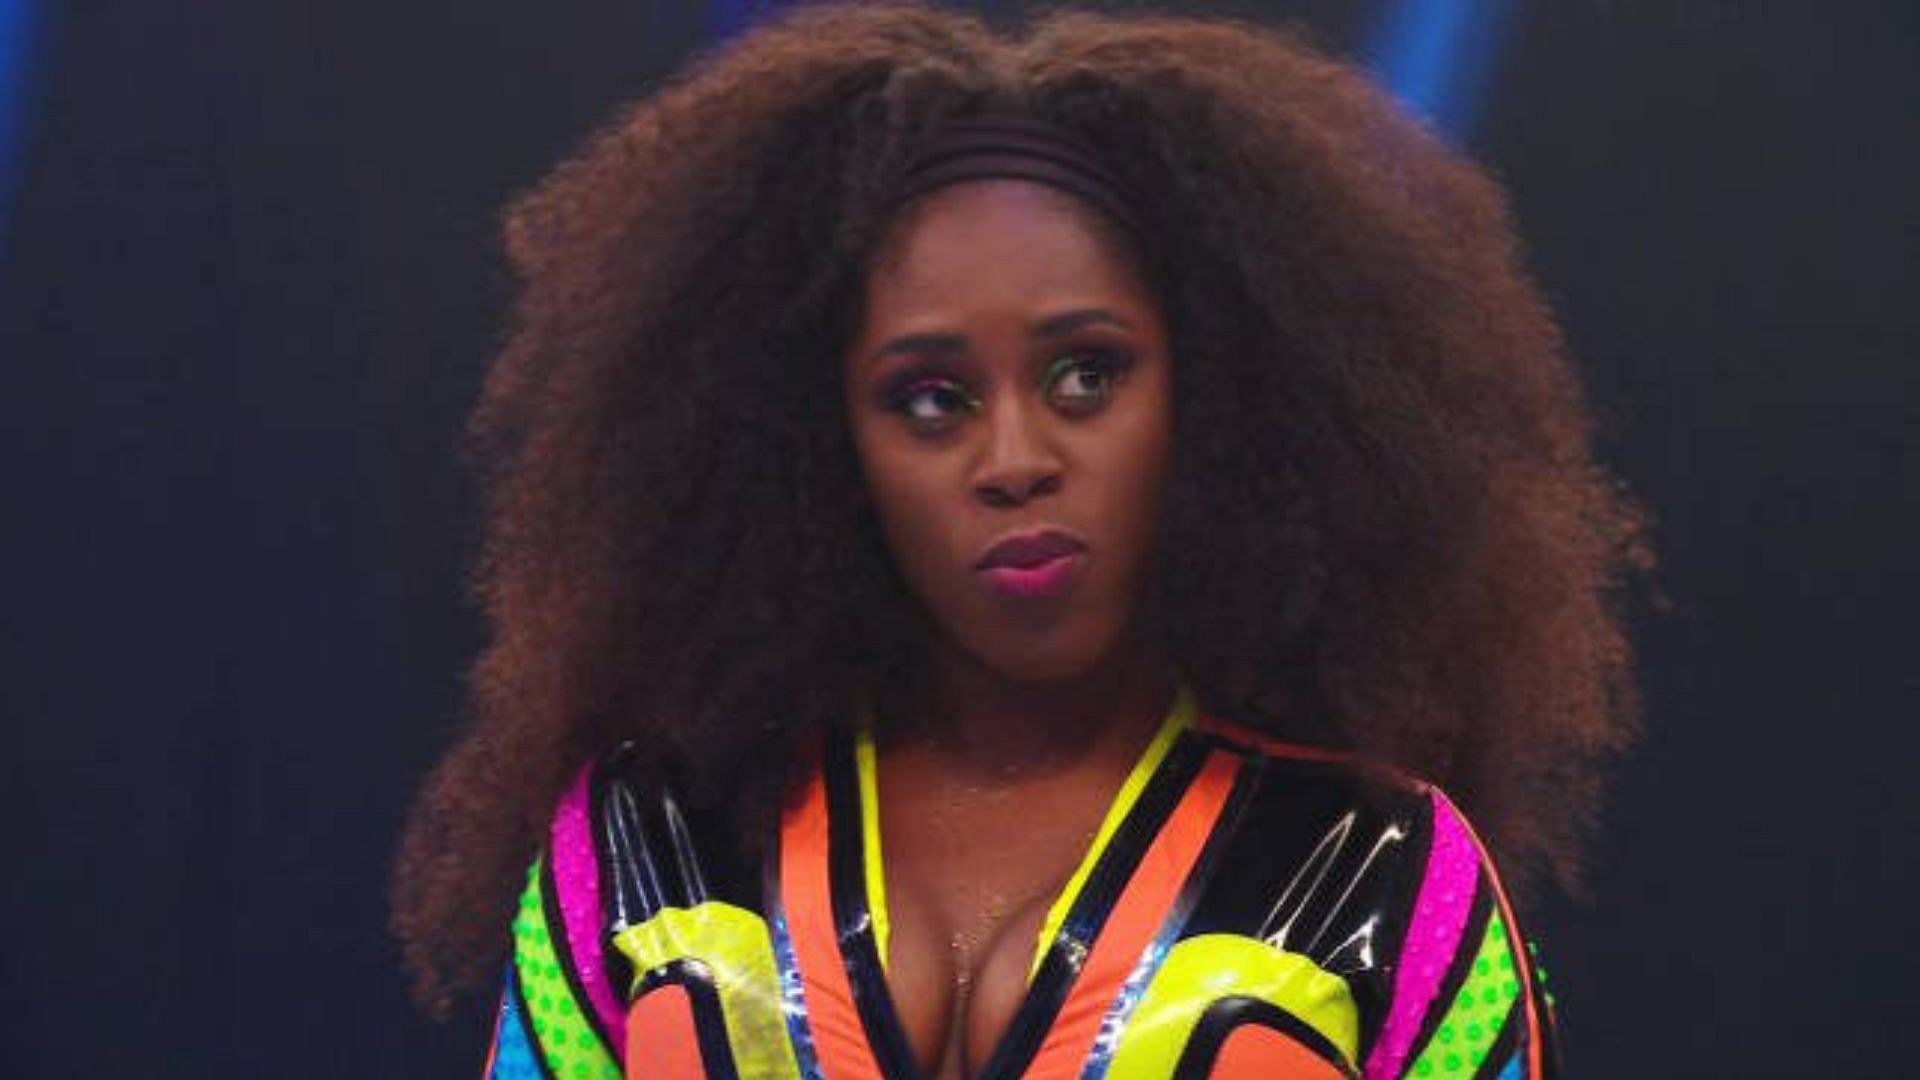 Naomi could be done with WWE after walking out last year